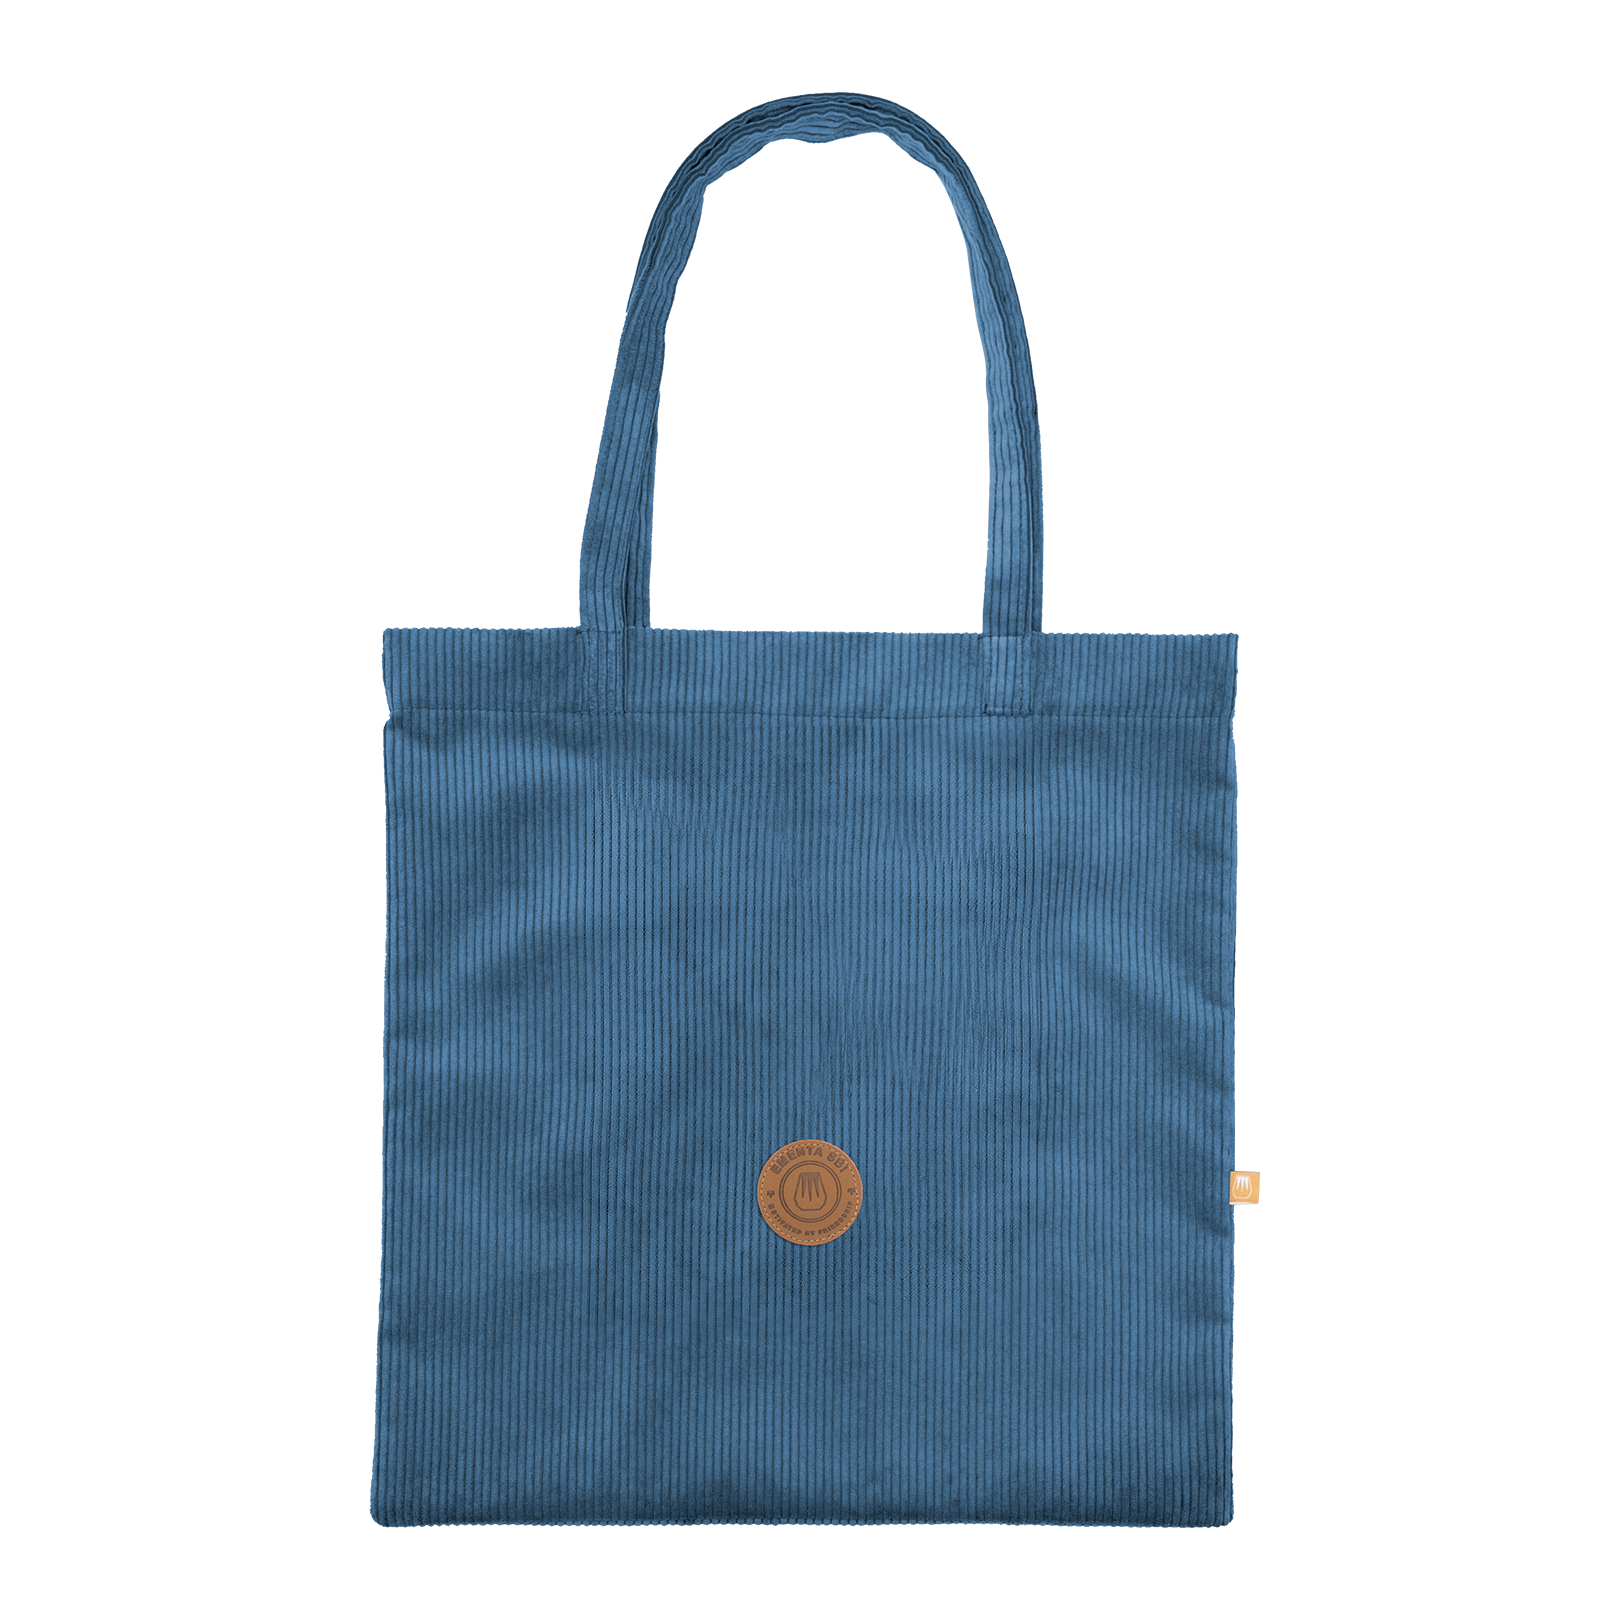 Patch Corduroy Tote Bag Navy